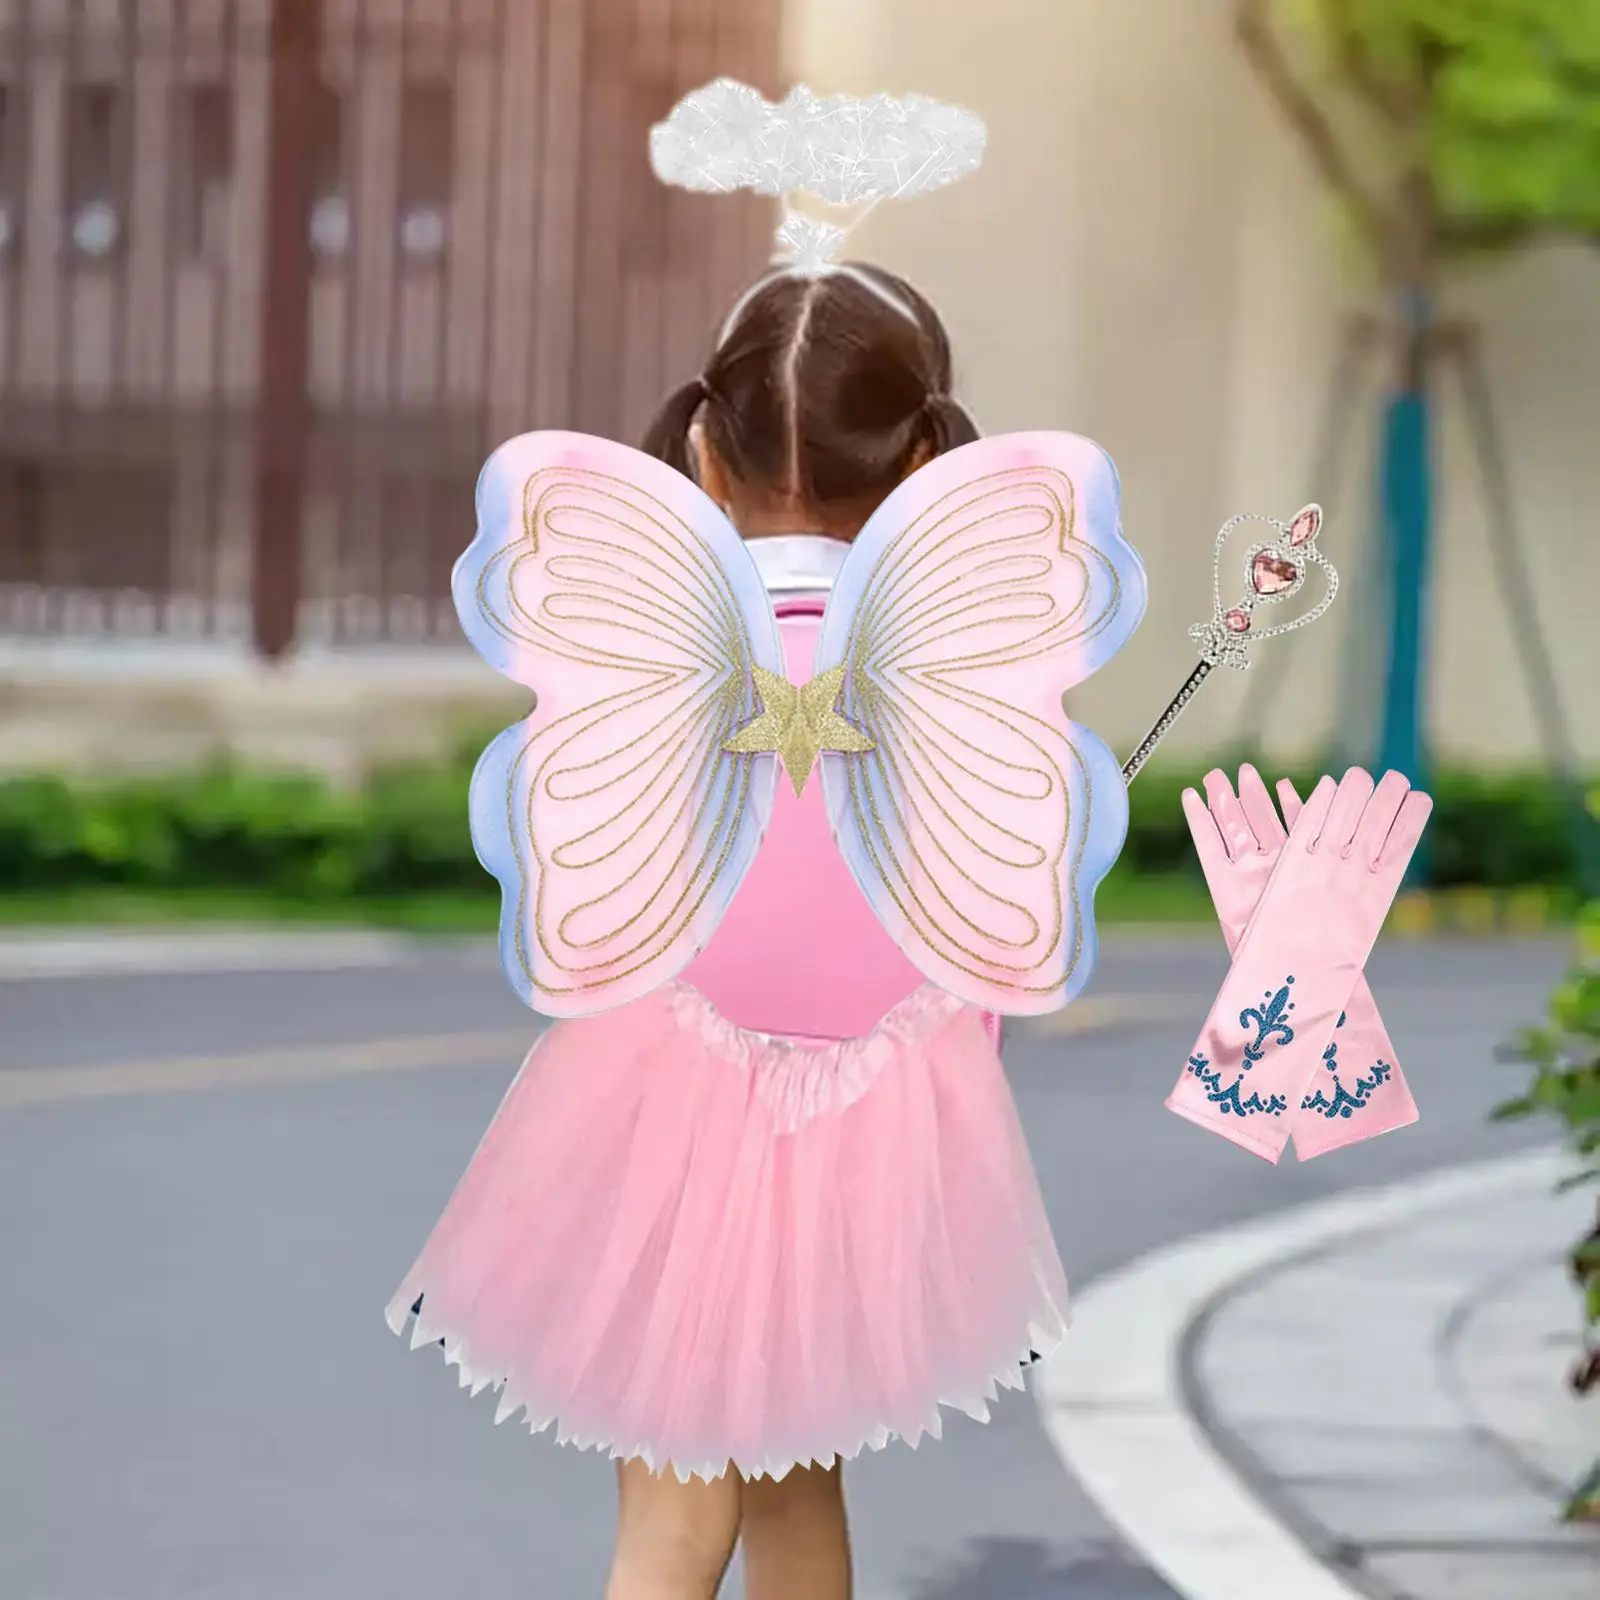 Fairy Princess Costume Set Gloves Butterfly Wings Wand for Pretended Play Halloween Photo Props Stage Performance Cosplay